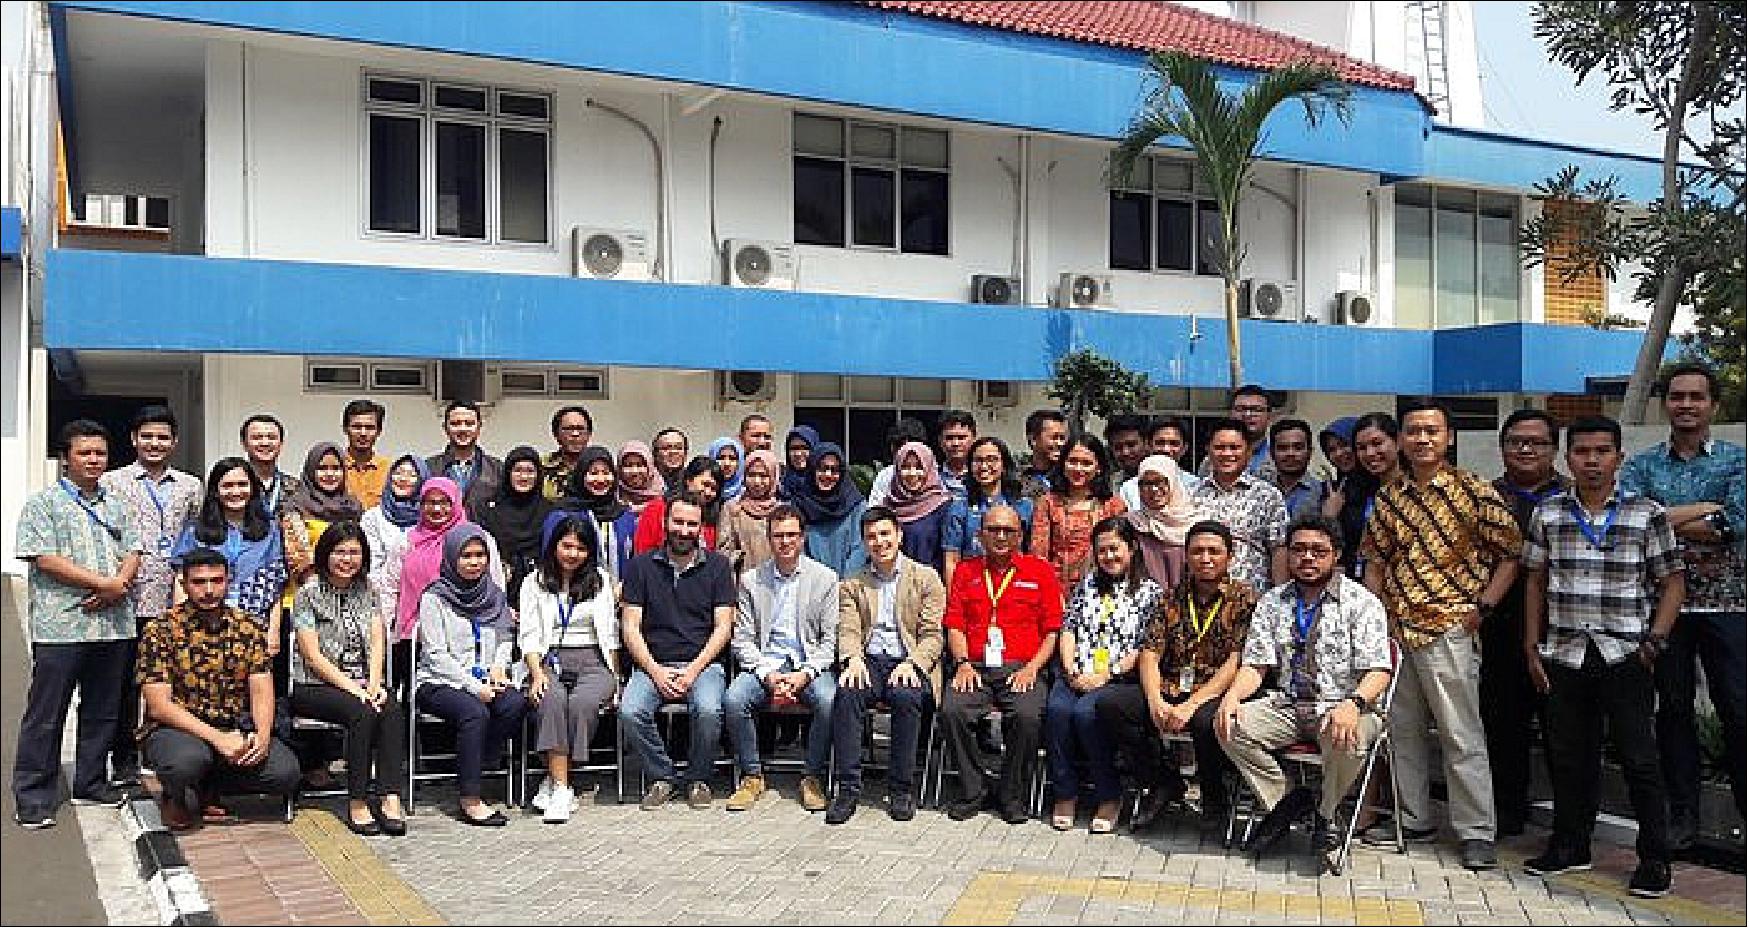 Figure 19: Learning about satellite data. Organized by the Asian Development Bank and the Indonesian National Institute of Aeronautics and Space, a week-long course was held in Jakarta to help authorities use satellite data to understand ground deformation following the earthquake and tsunami that hit the Indonesian island of Sulawesi in September 2018. The course was attended by more than 60 representatives from numerous Indonesian authorities. Experts from Indra, Planetek and BRGM explained the technical details and methodologies of using these satellite data products. Lecturers Michael Foumelis (BRGM), Alberto Lorenzo Alonso (Indra) and Vincenzo Massimi (Planetek) are sitting fifth, sixth and seventh from the left, respectively (image credit: LAPAN)